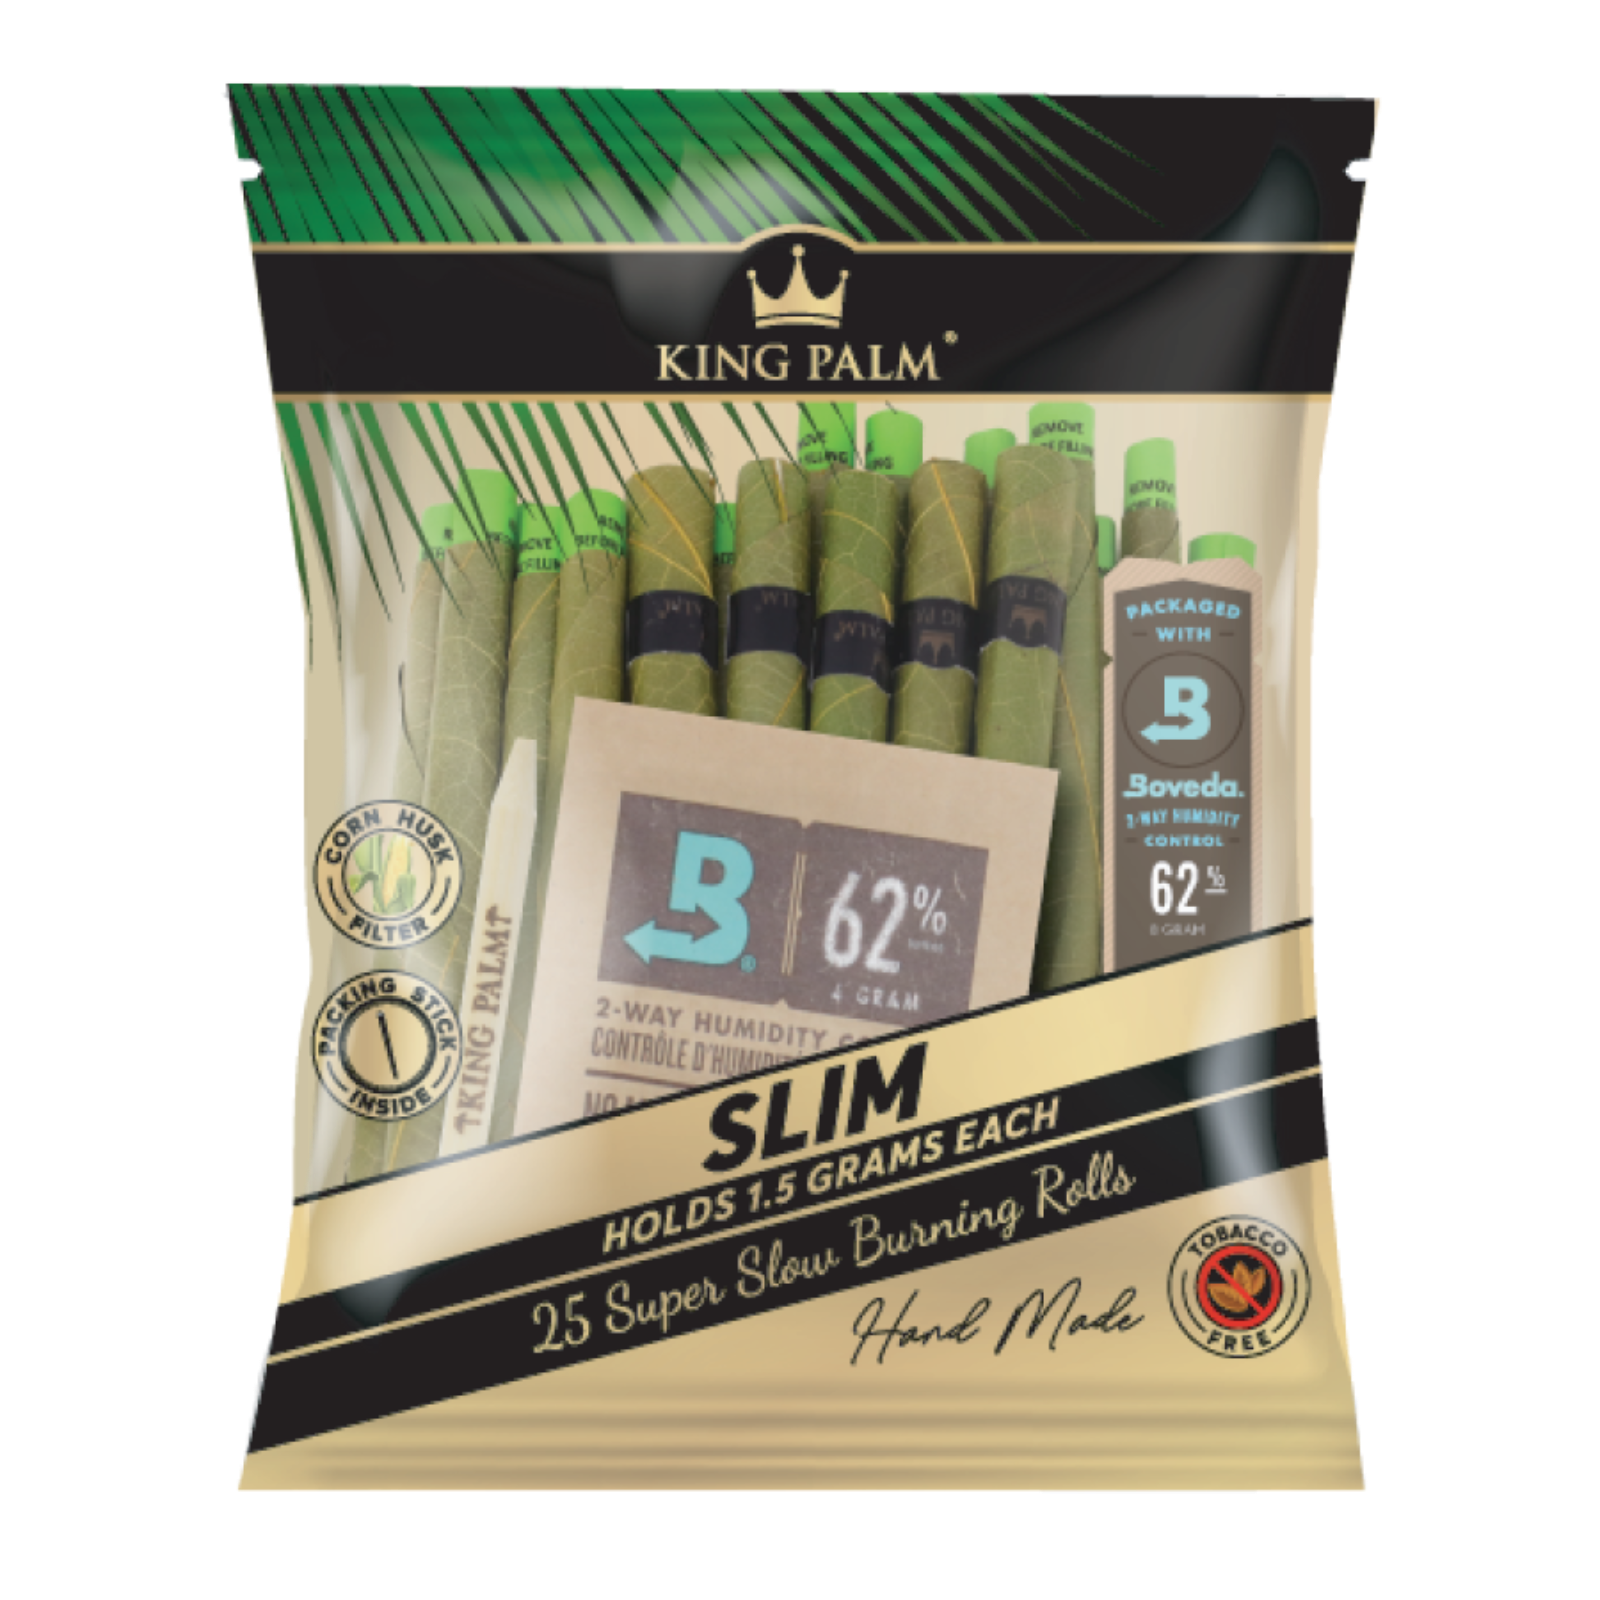 King Palm Leaf Rolls WrapsRollie Size Holds 0.5 Grams4 Packs and Freebies 